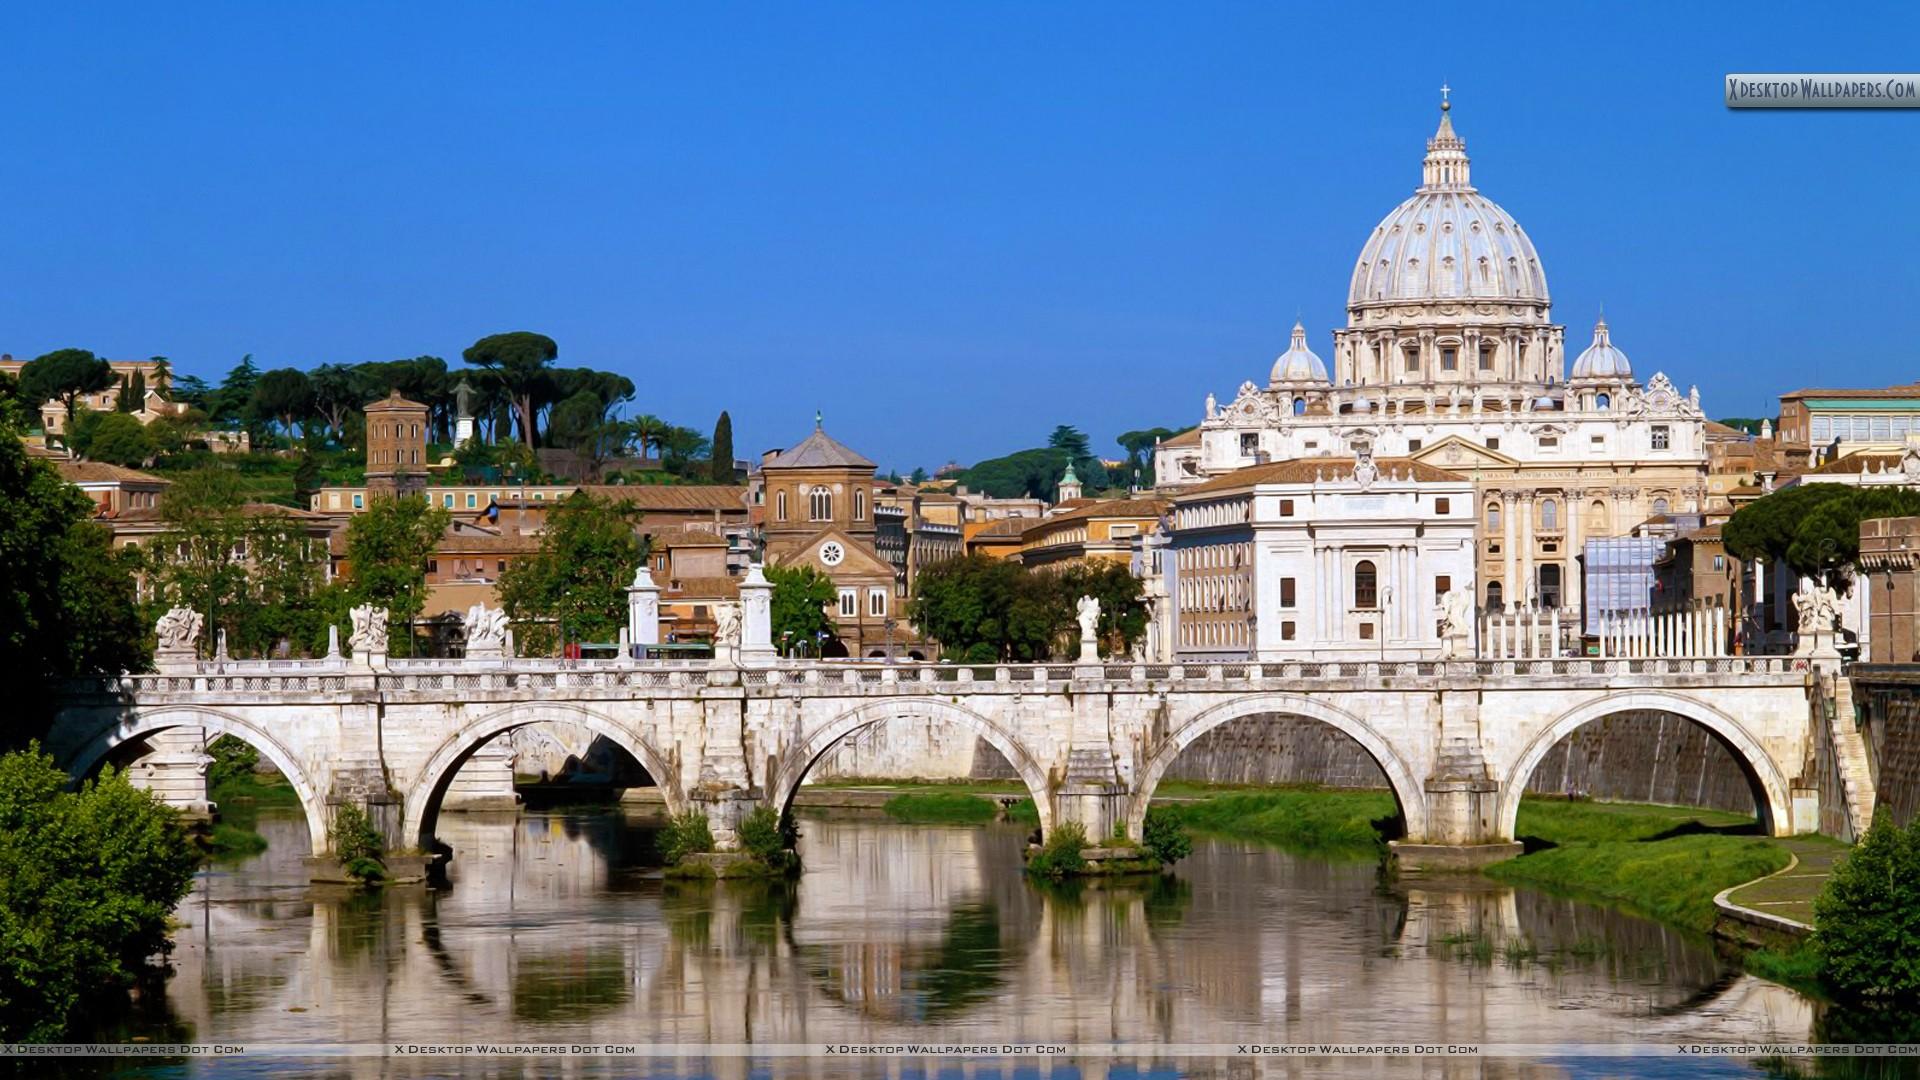 The Vatican Seen Past the Tiber River, Rome, Italy Wallpaper